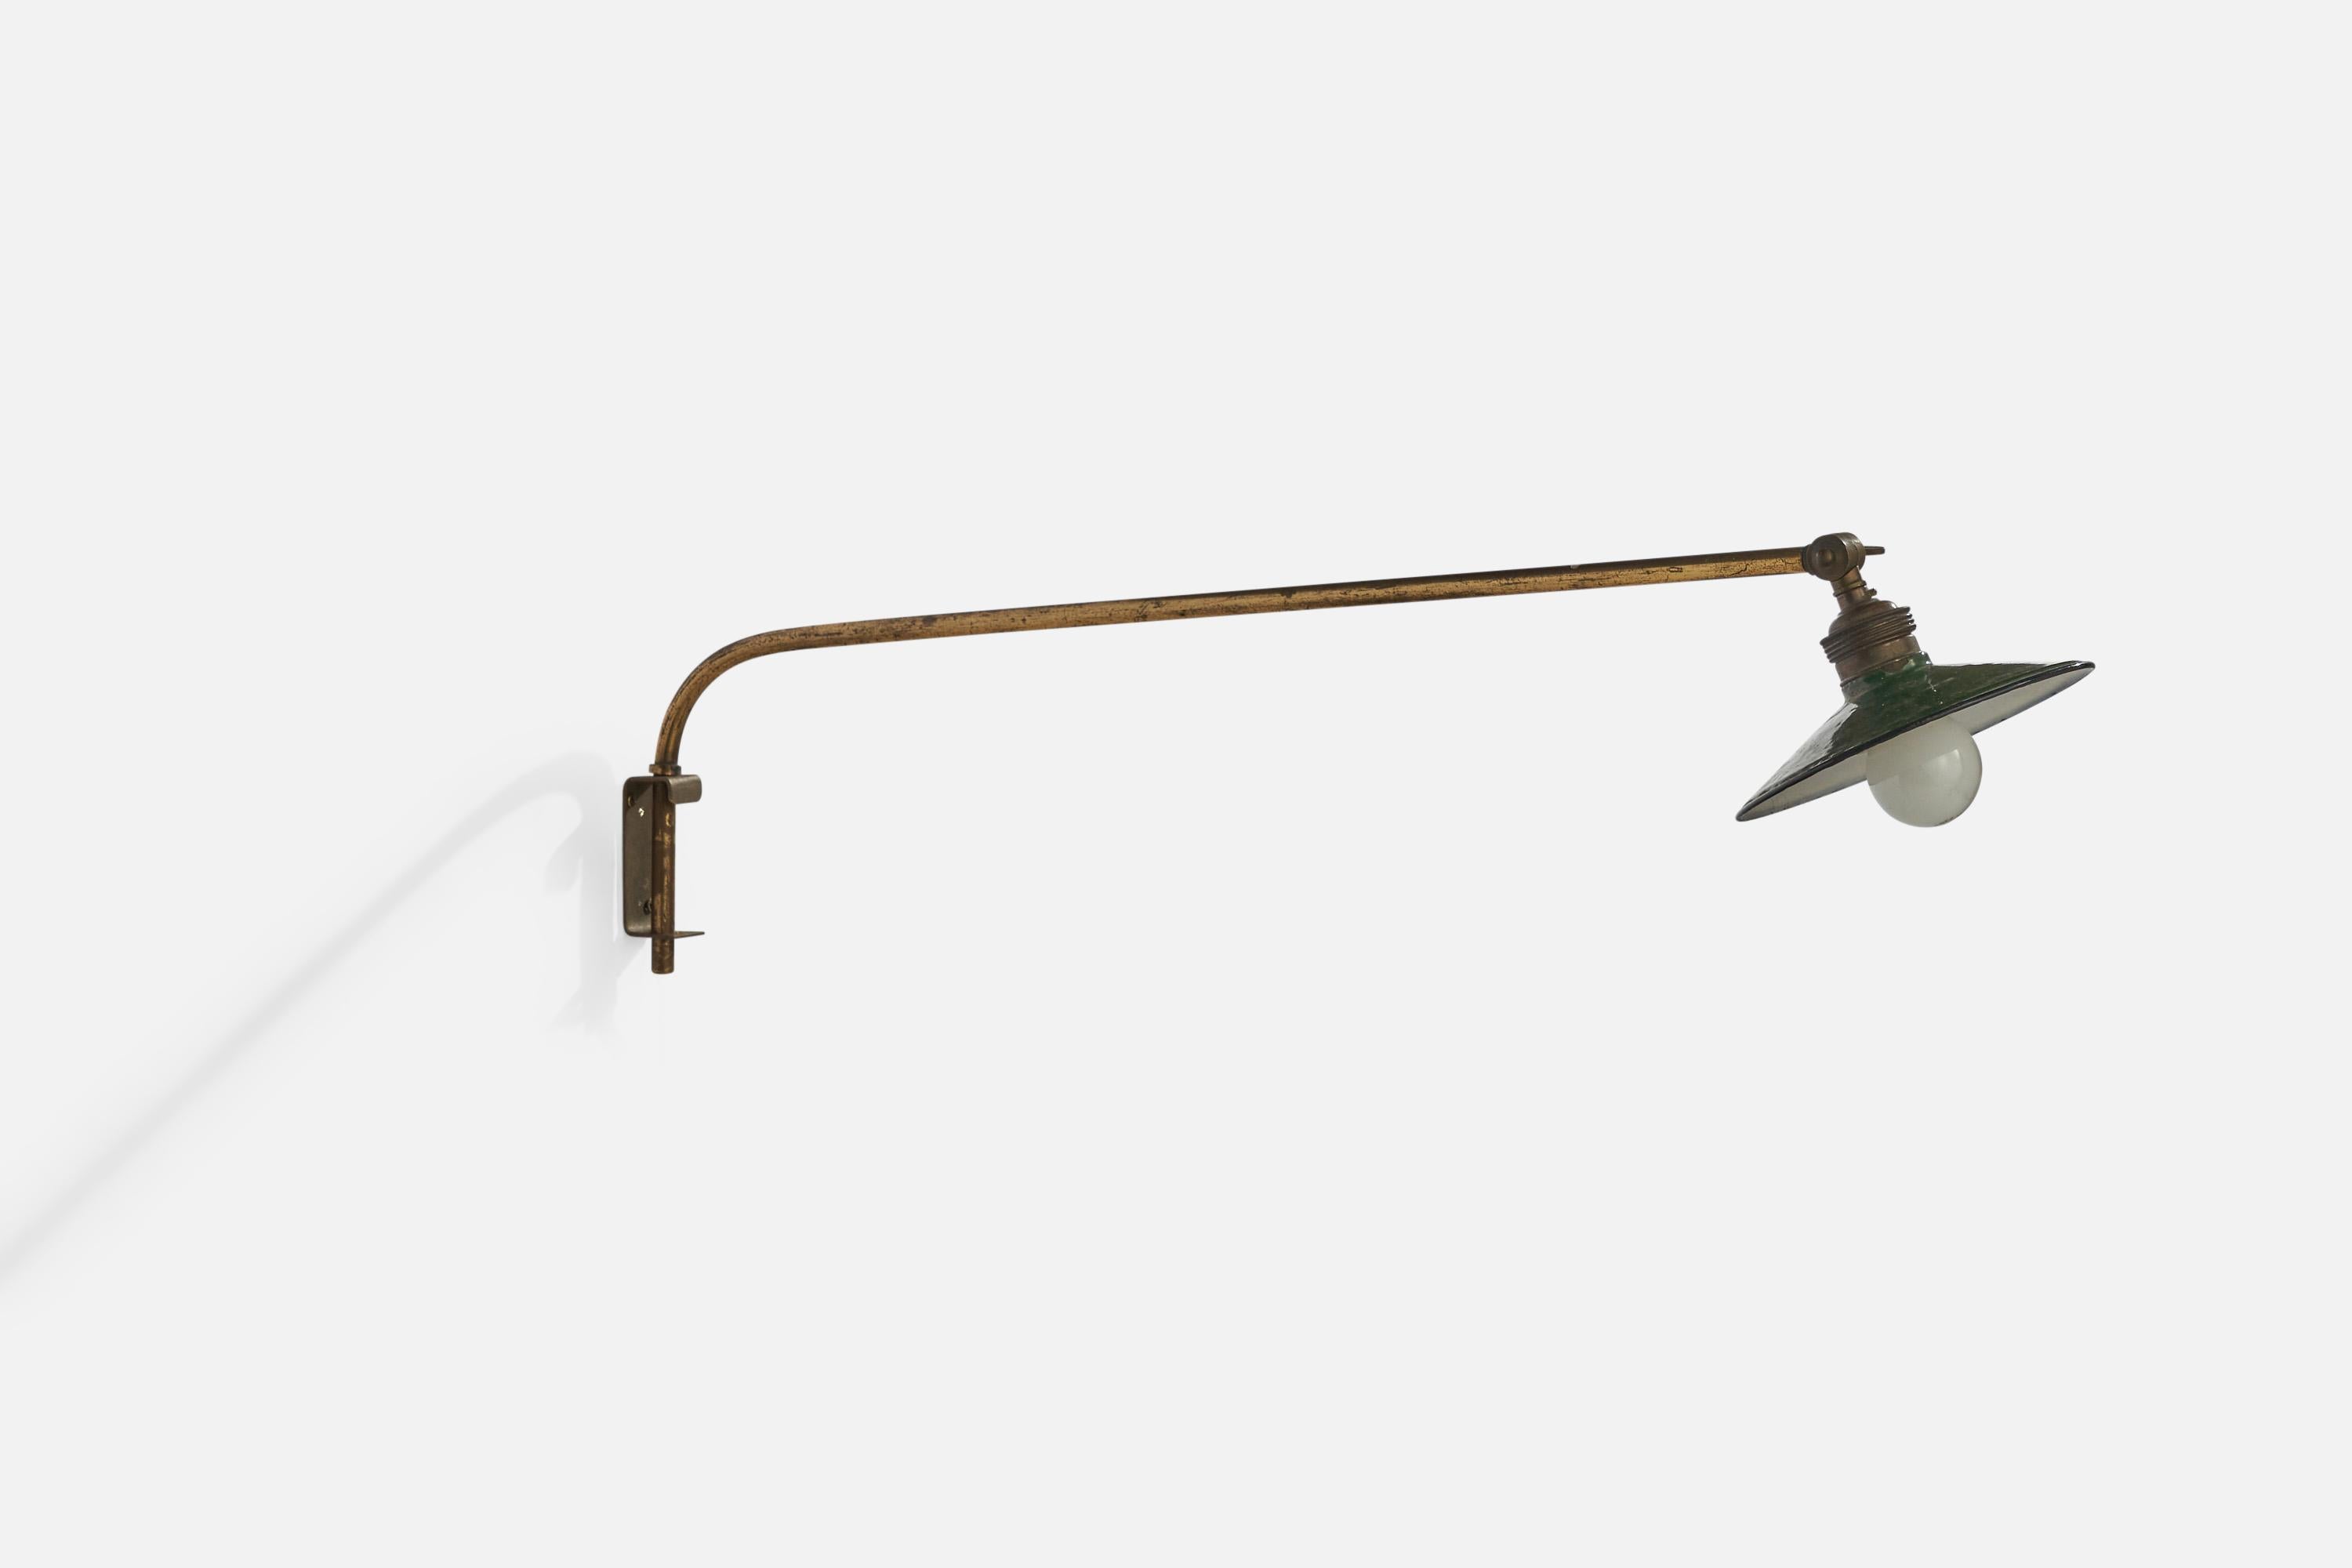 A brass and green-lacquered metal wall light designed and produced in Sweden, c. 1930s.

Please note lamp is configured for plug in with cord feeding from bottom of stem.

Overall Dimensions (inches): 6” H x 6” W x 28” D
Light angle is